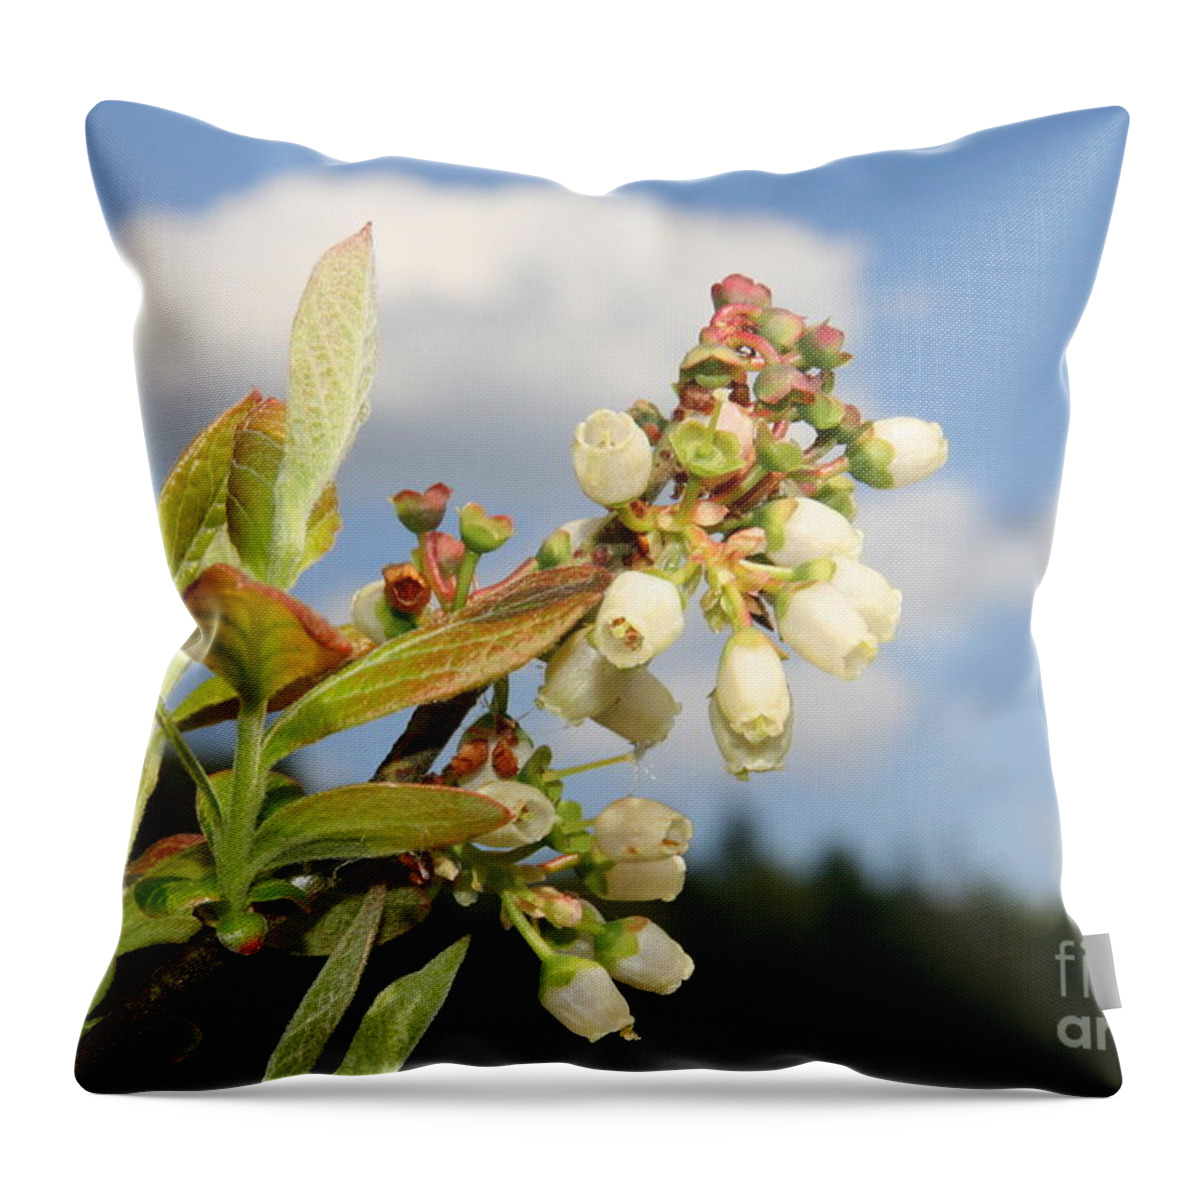 Flower Photography Throw Pillow featuring the photograph Floral Bells by Neal Eslinger